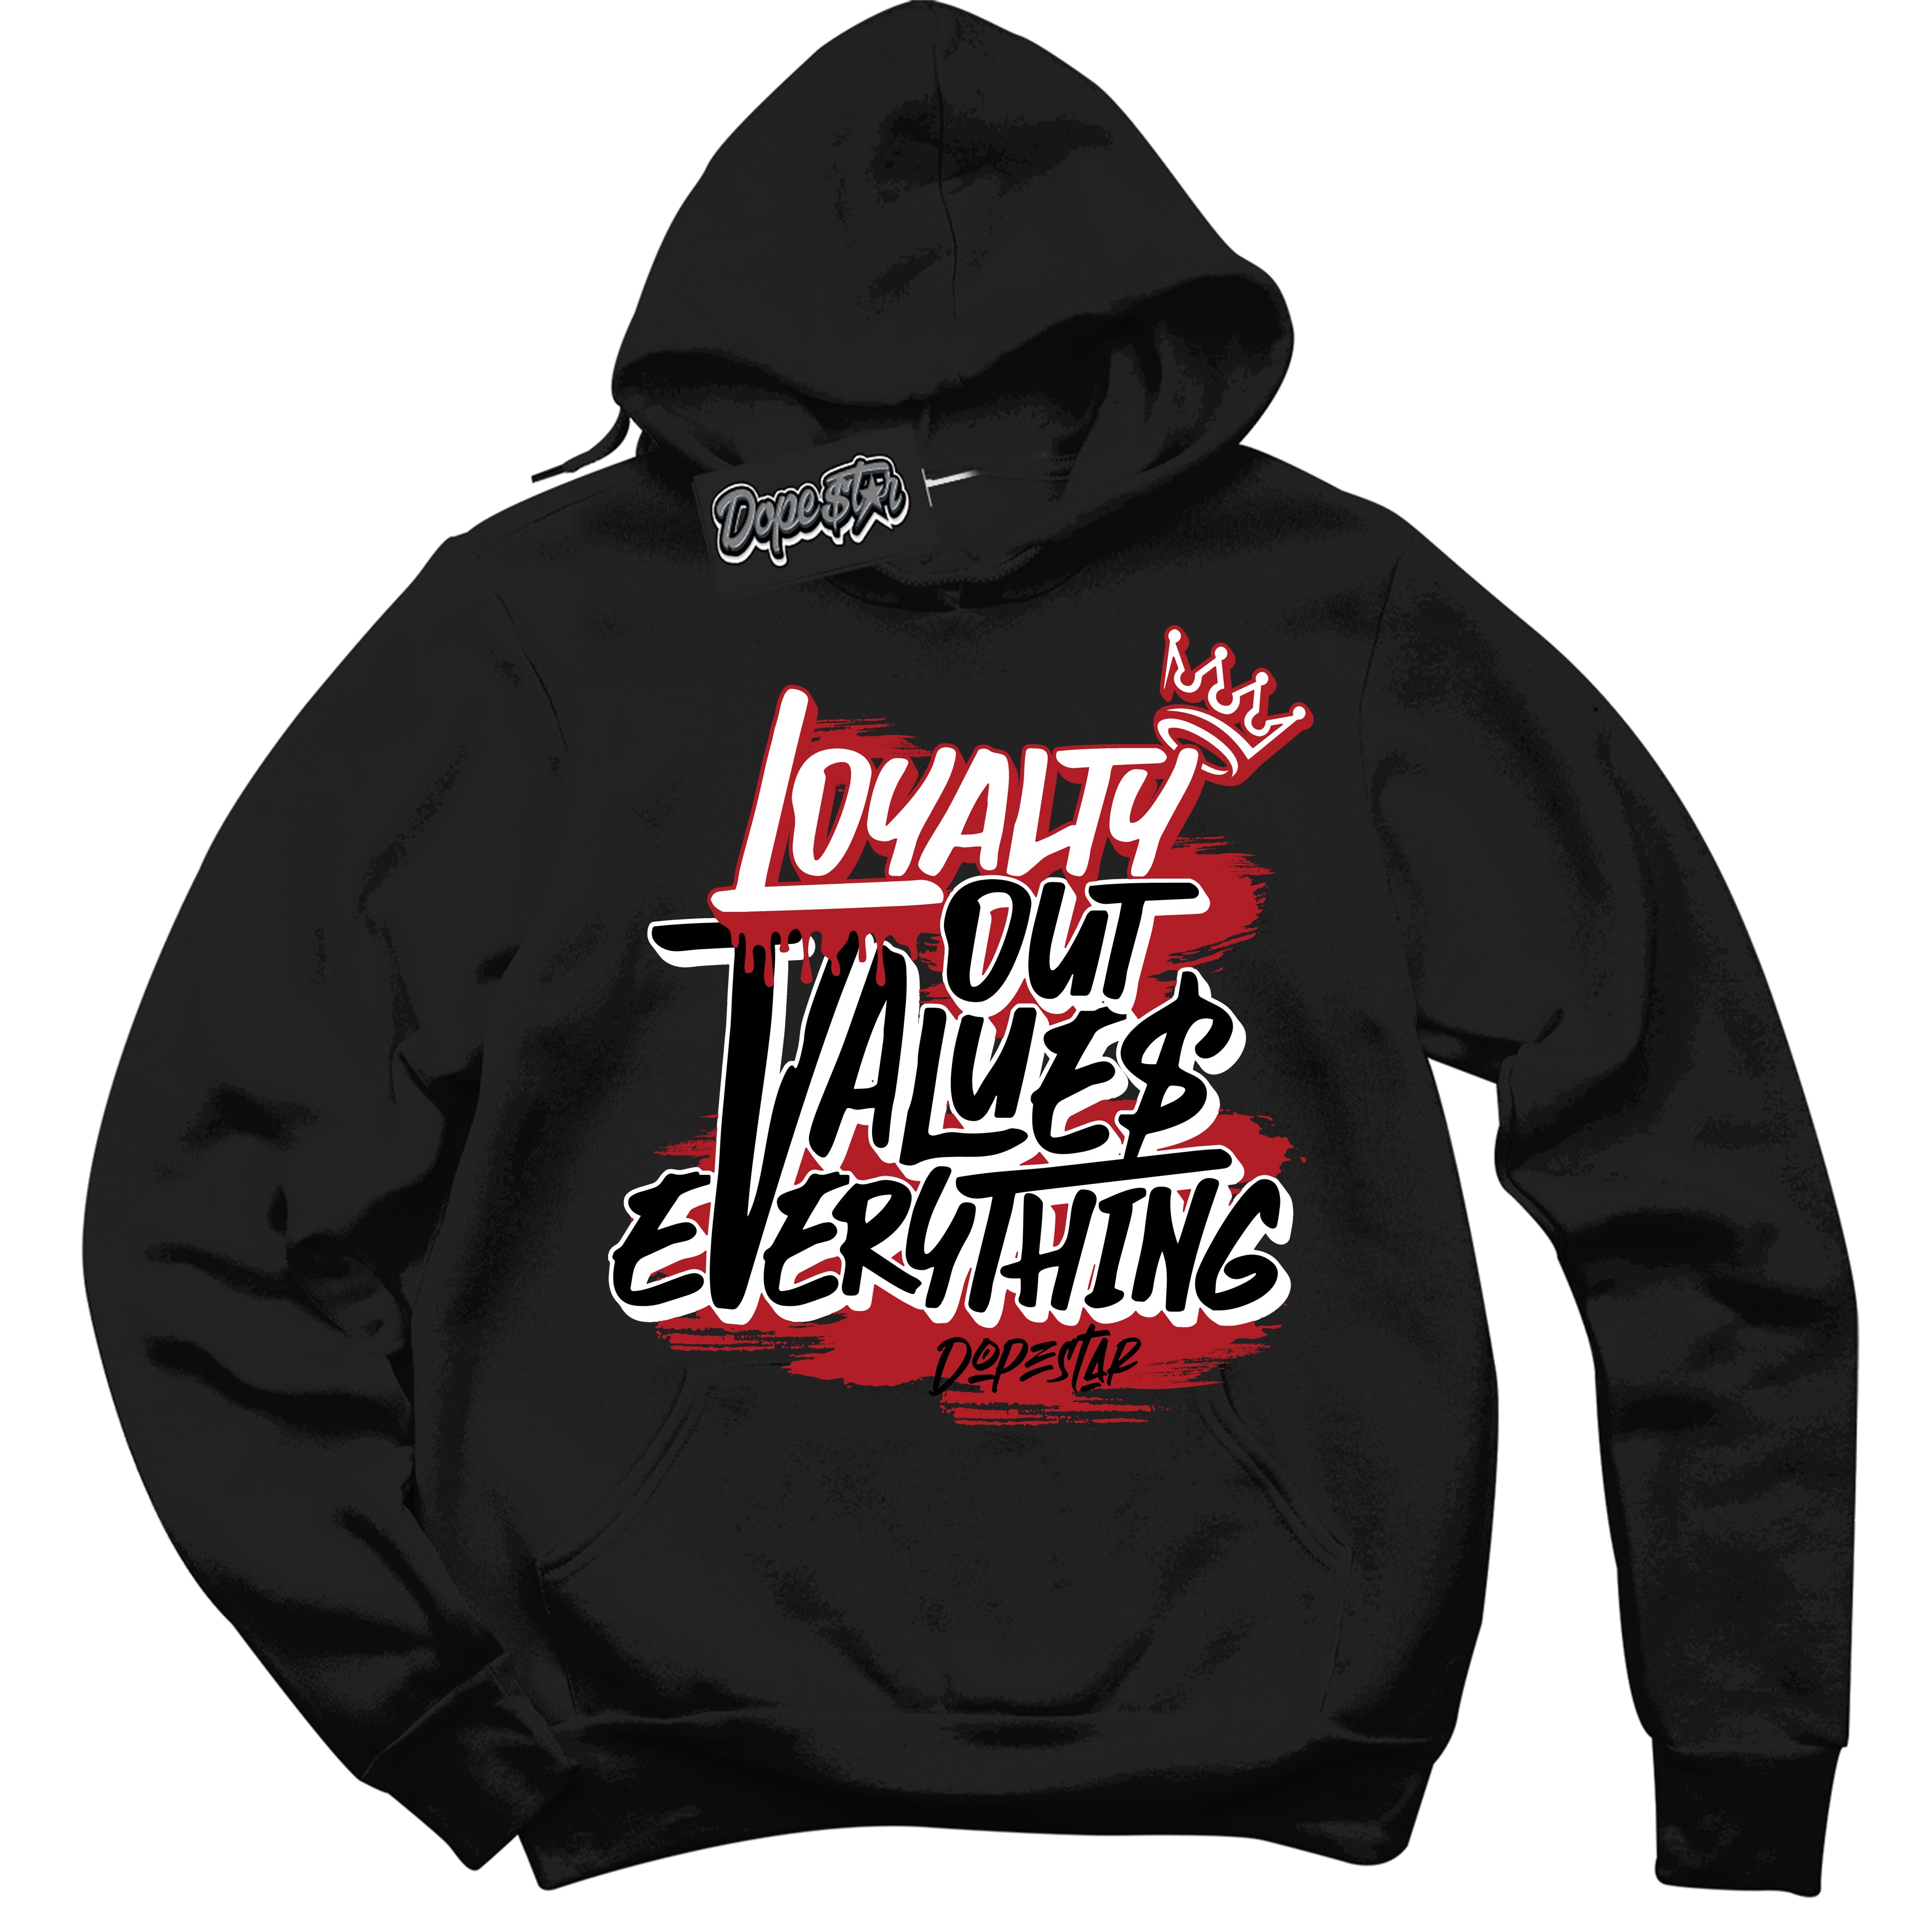 Cool Black Hoodie with “ Loyalty Out Values Everything ”  design that Perfectly Matches  Red Swoosh Panda  Sneakers.